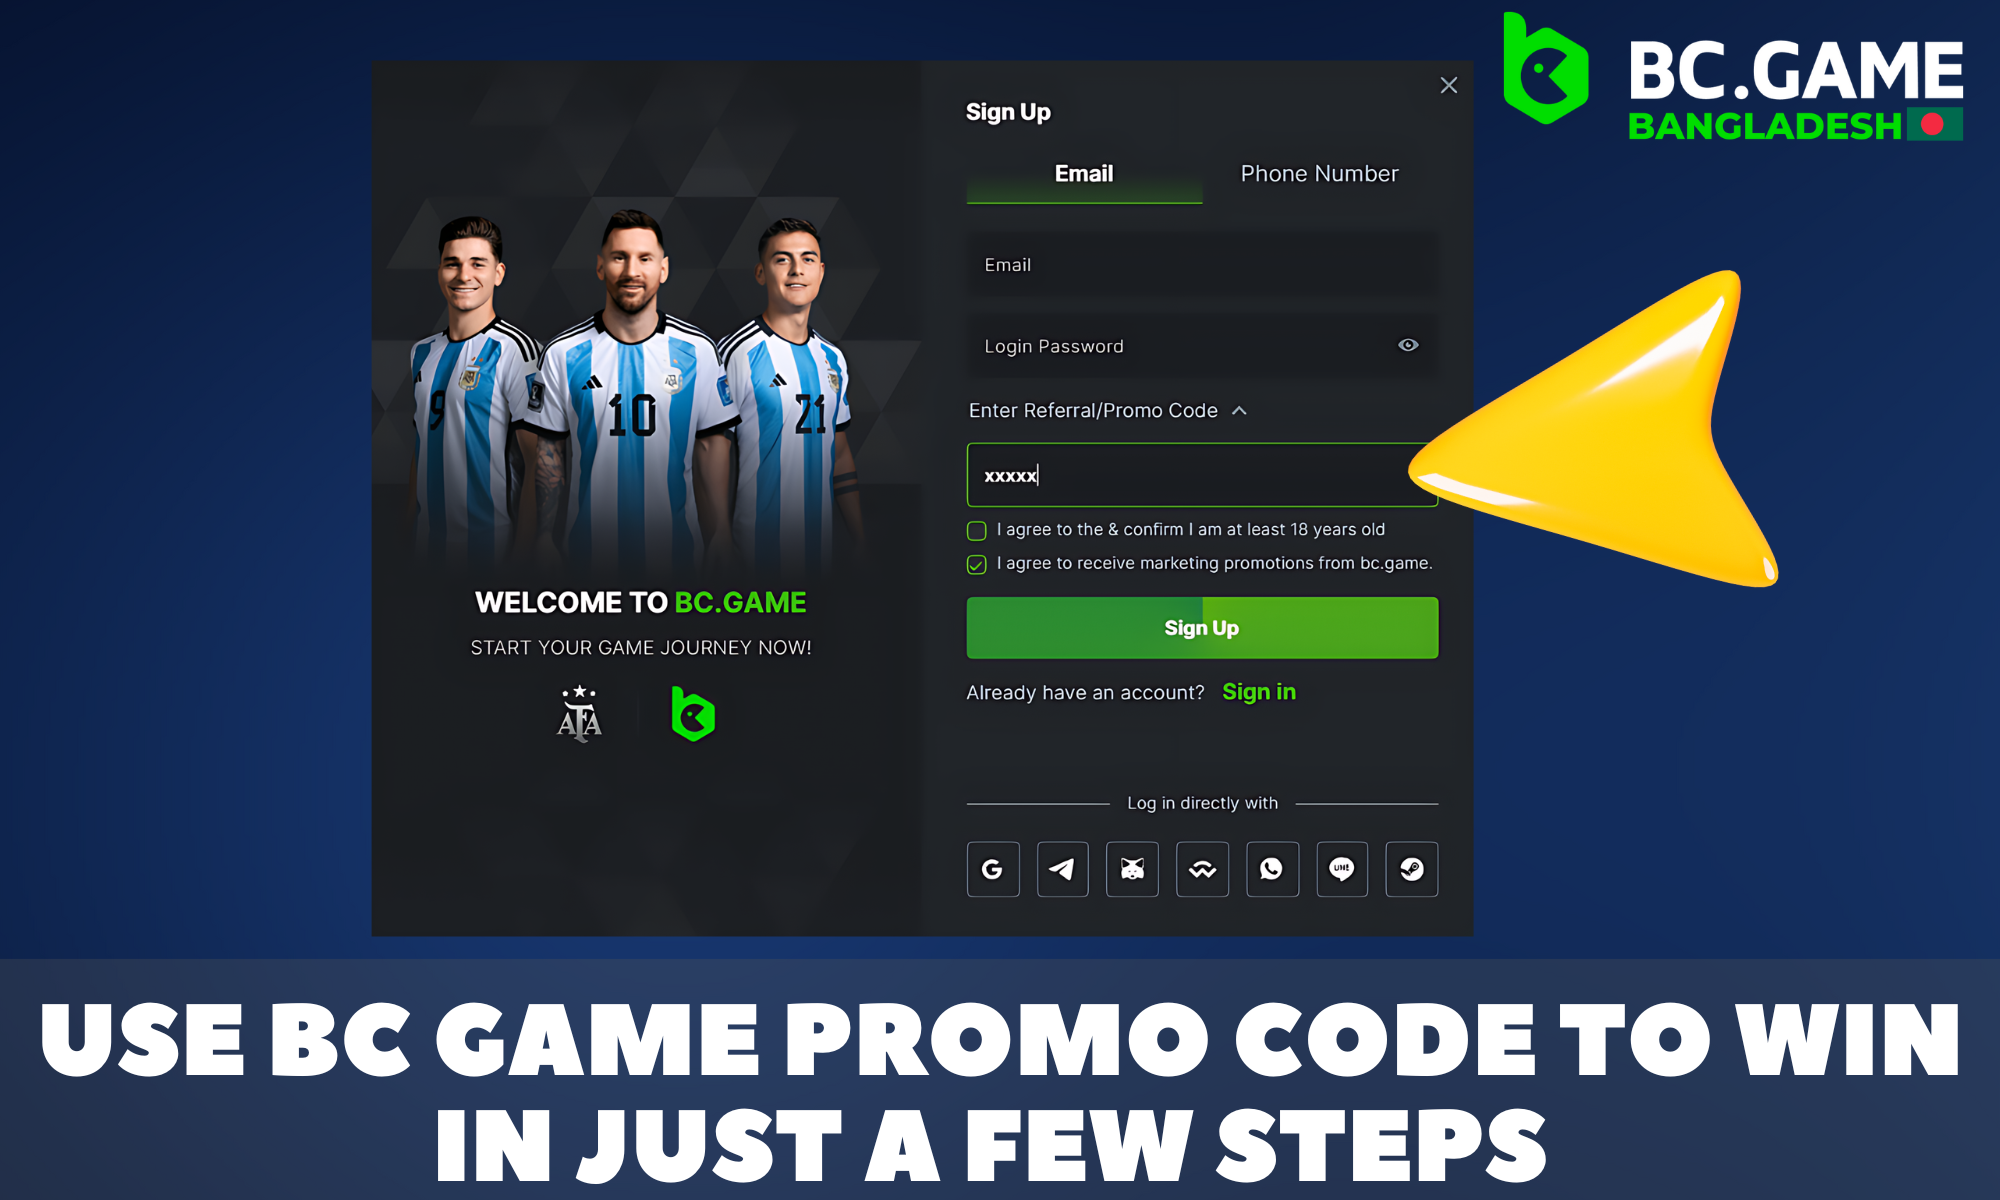 Step-by-step instructions on how to use a promo code in BC Game